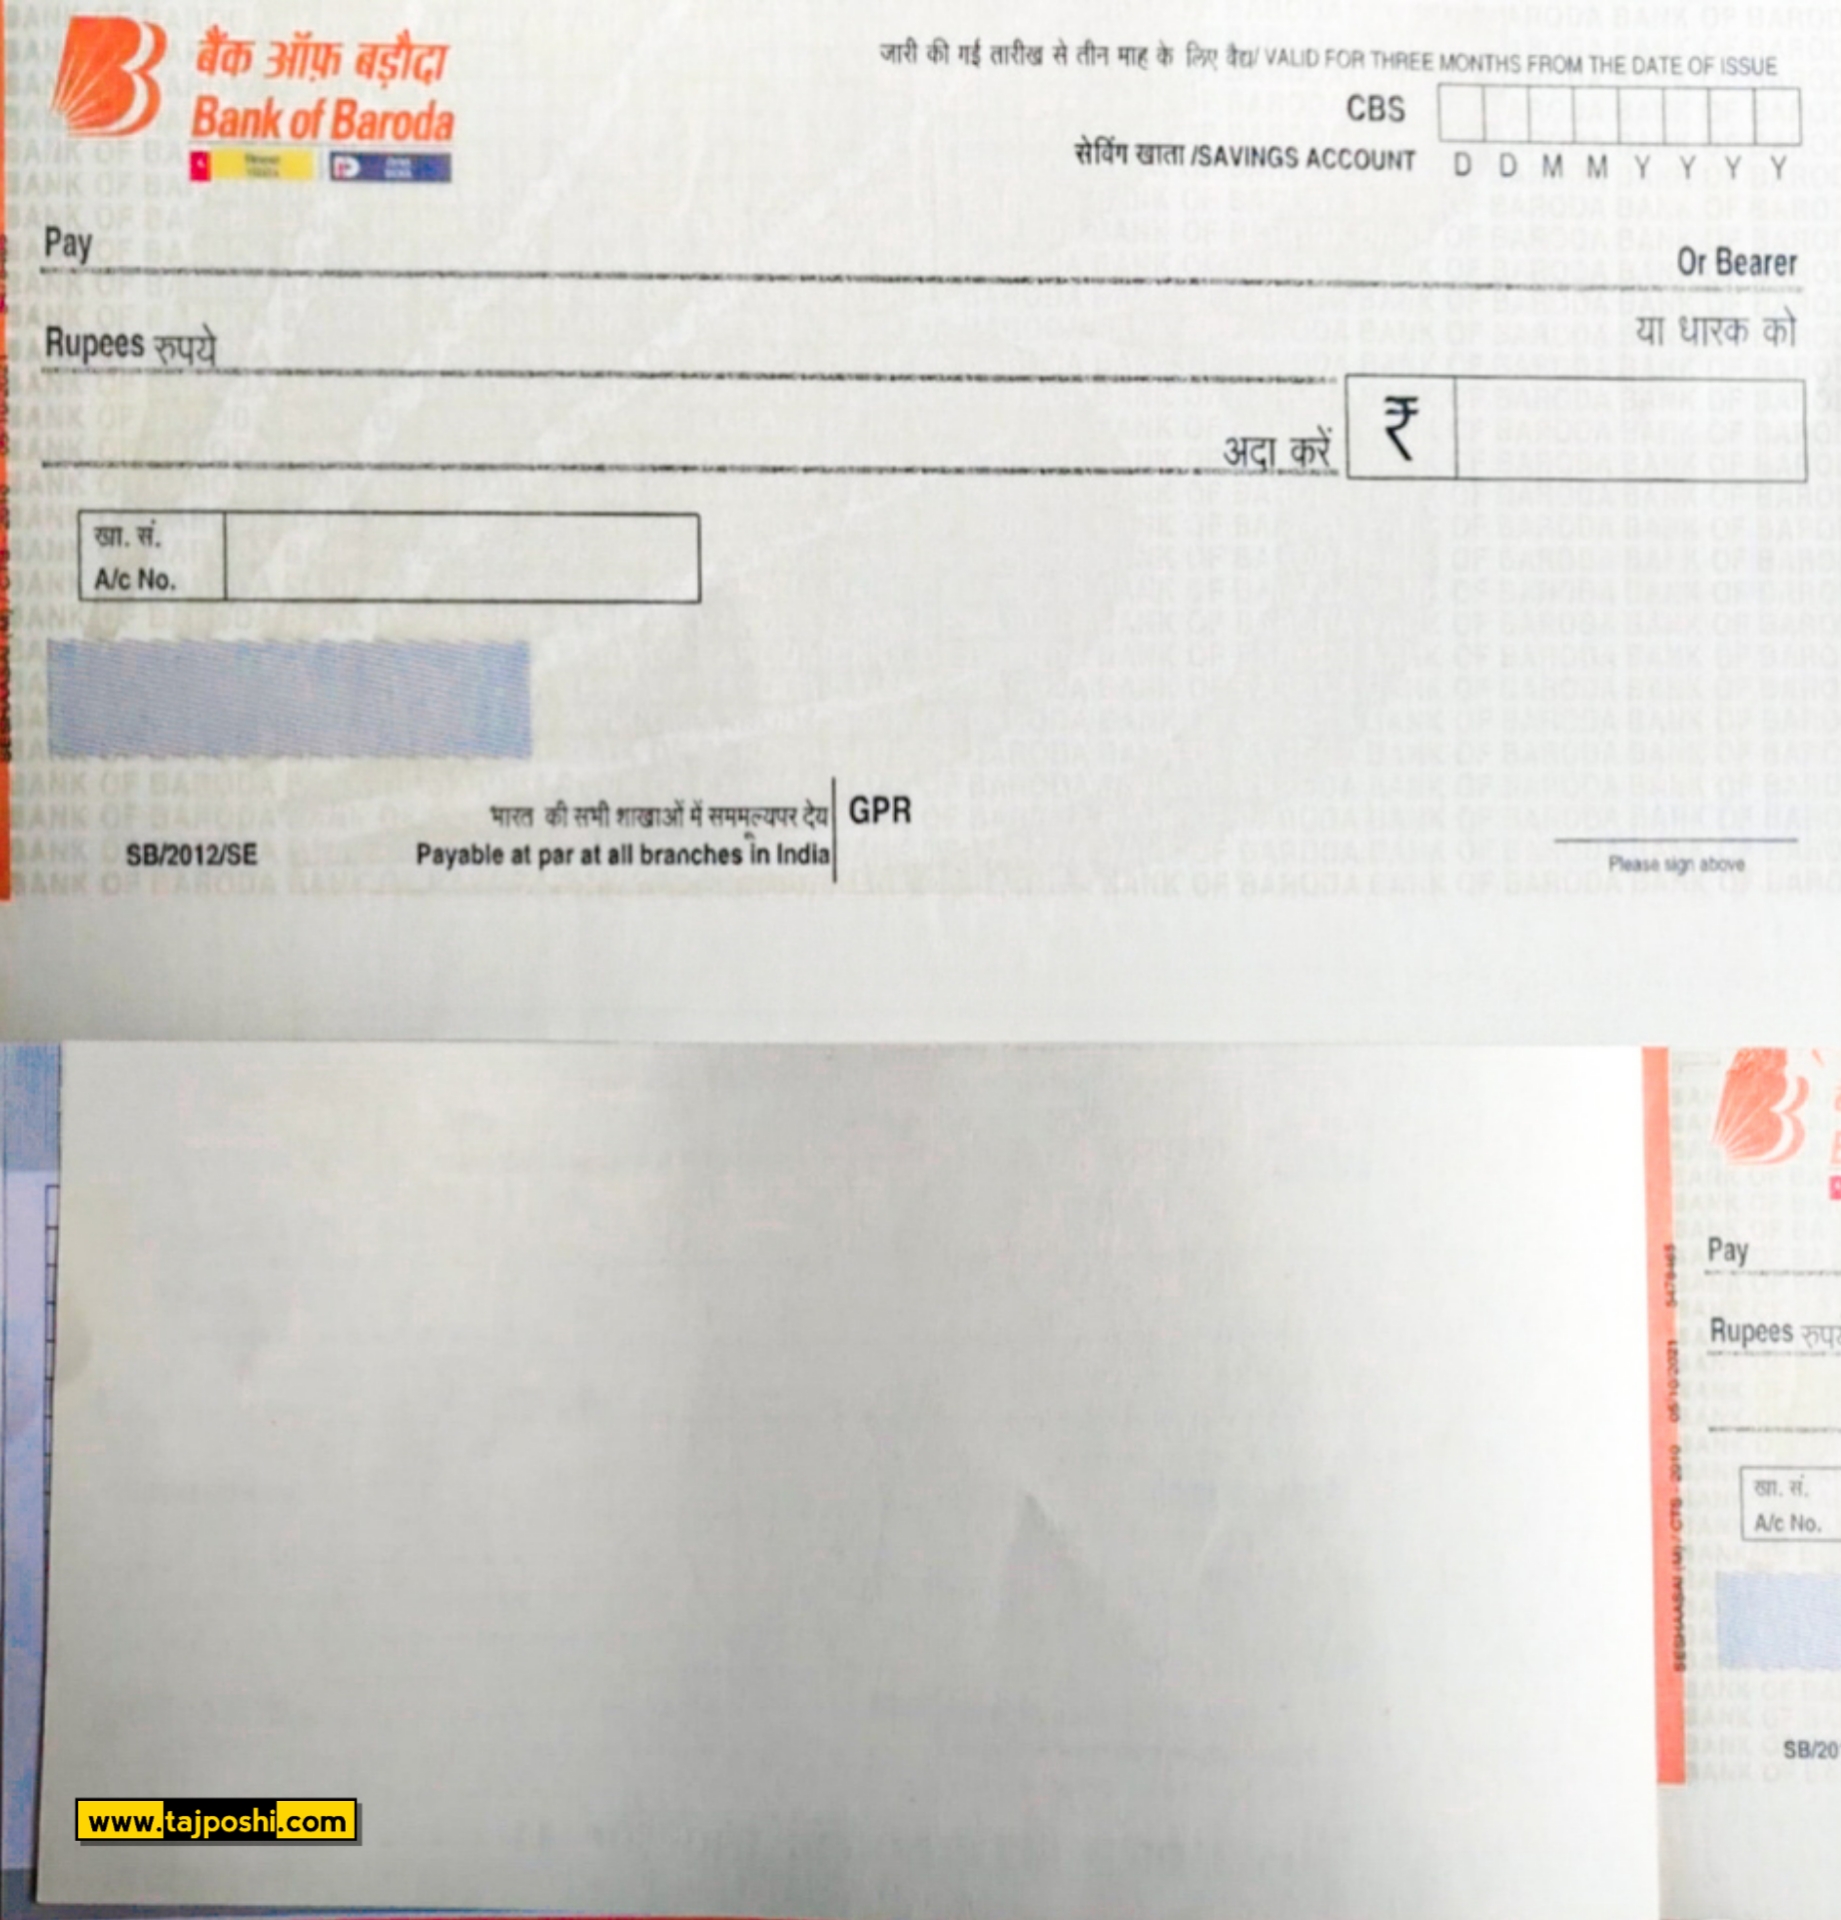 Cheque Crossing ! Crossing of cheque explained in Malayalam ! Different  Types of cheque crossing ! 